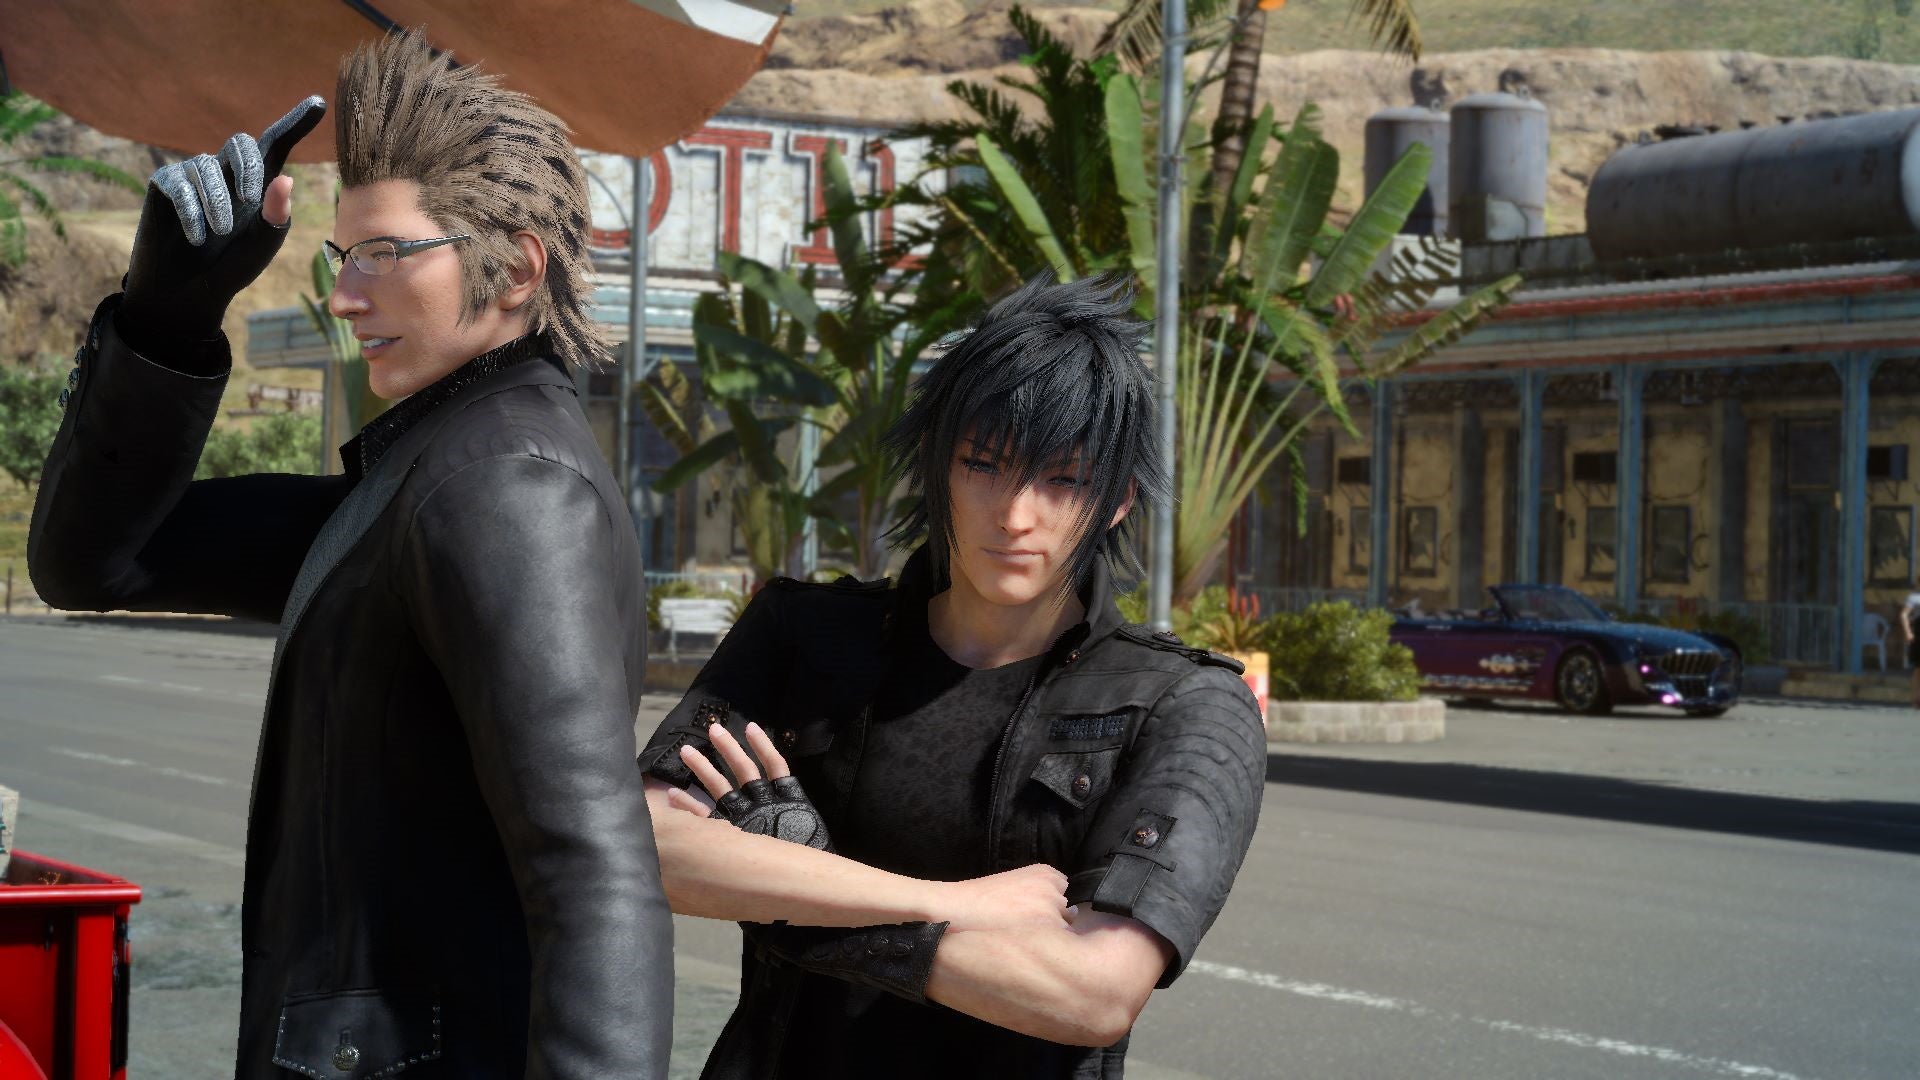 A screenshot from Final Fantasy XV which shows Noctis and Ignis stood next to eachother, posing for the camera. Noctic has his arms crossed, while Ignis is turned to the side.